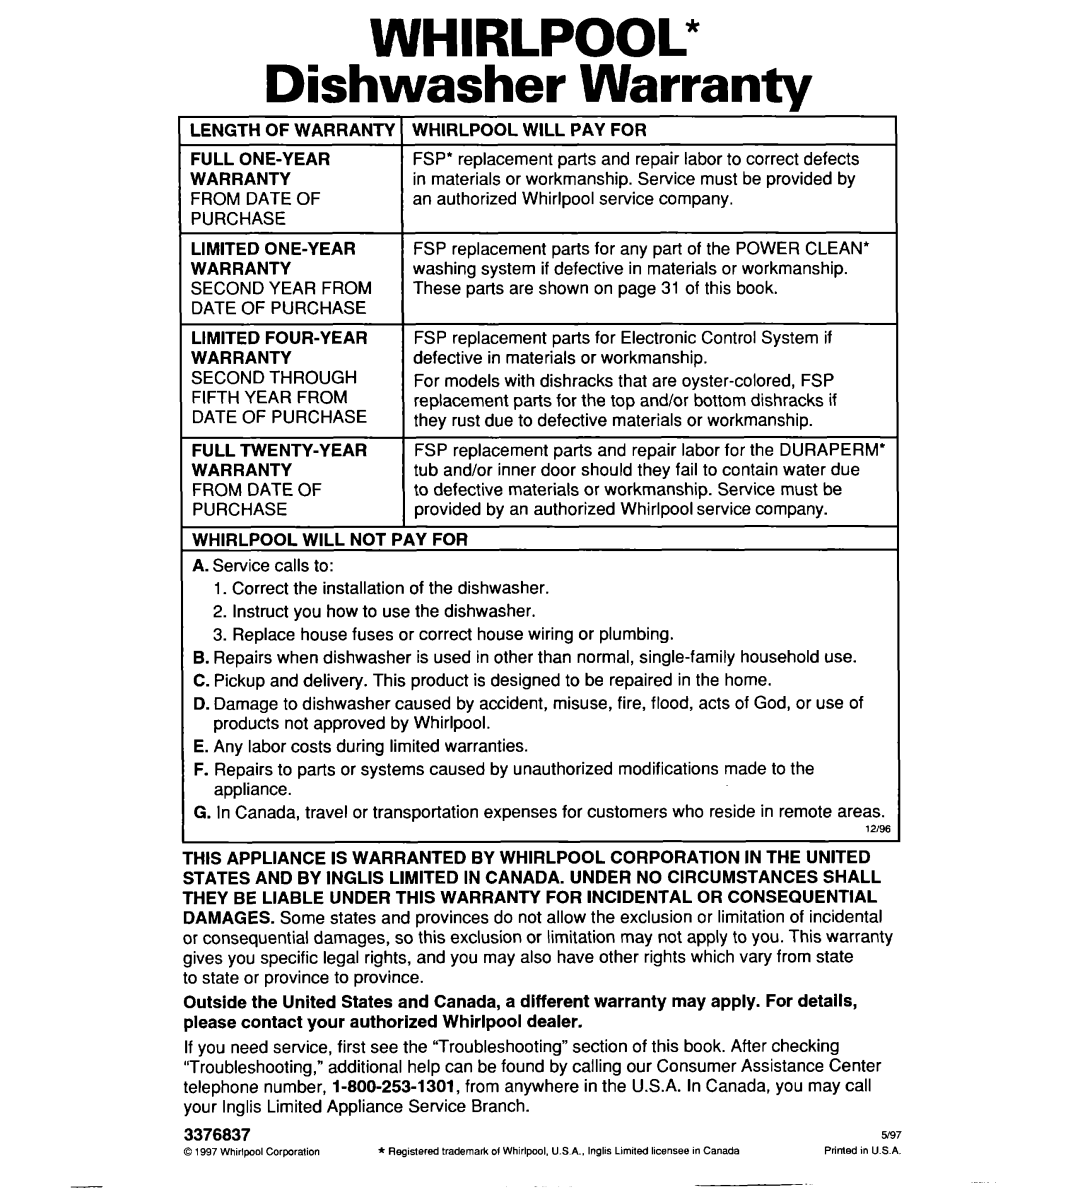 Whirlpool 935 Series, 927 Series, 930 Series WHIRLPOOL Dishwasher Warranty, LENGTH OF WARRANTY 1 WHIRLPOOL WILL PAY FOR 